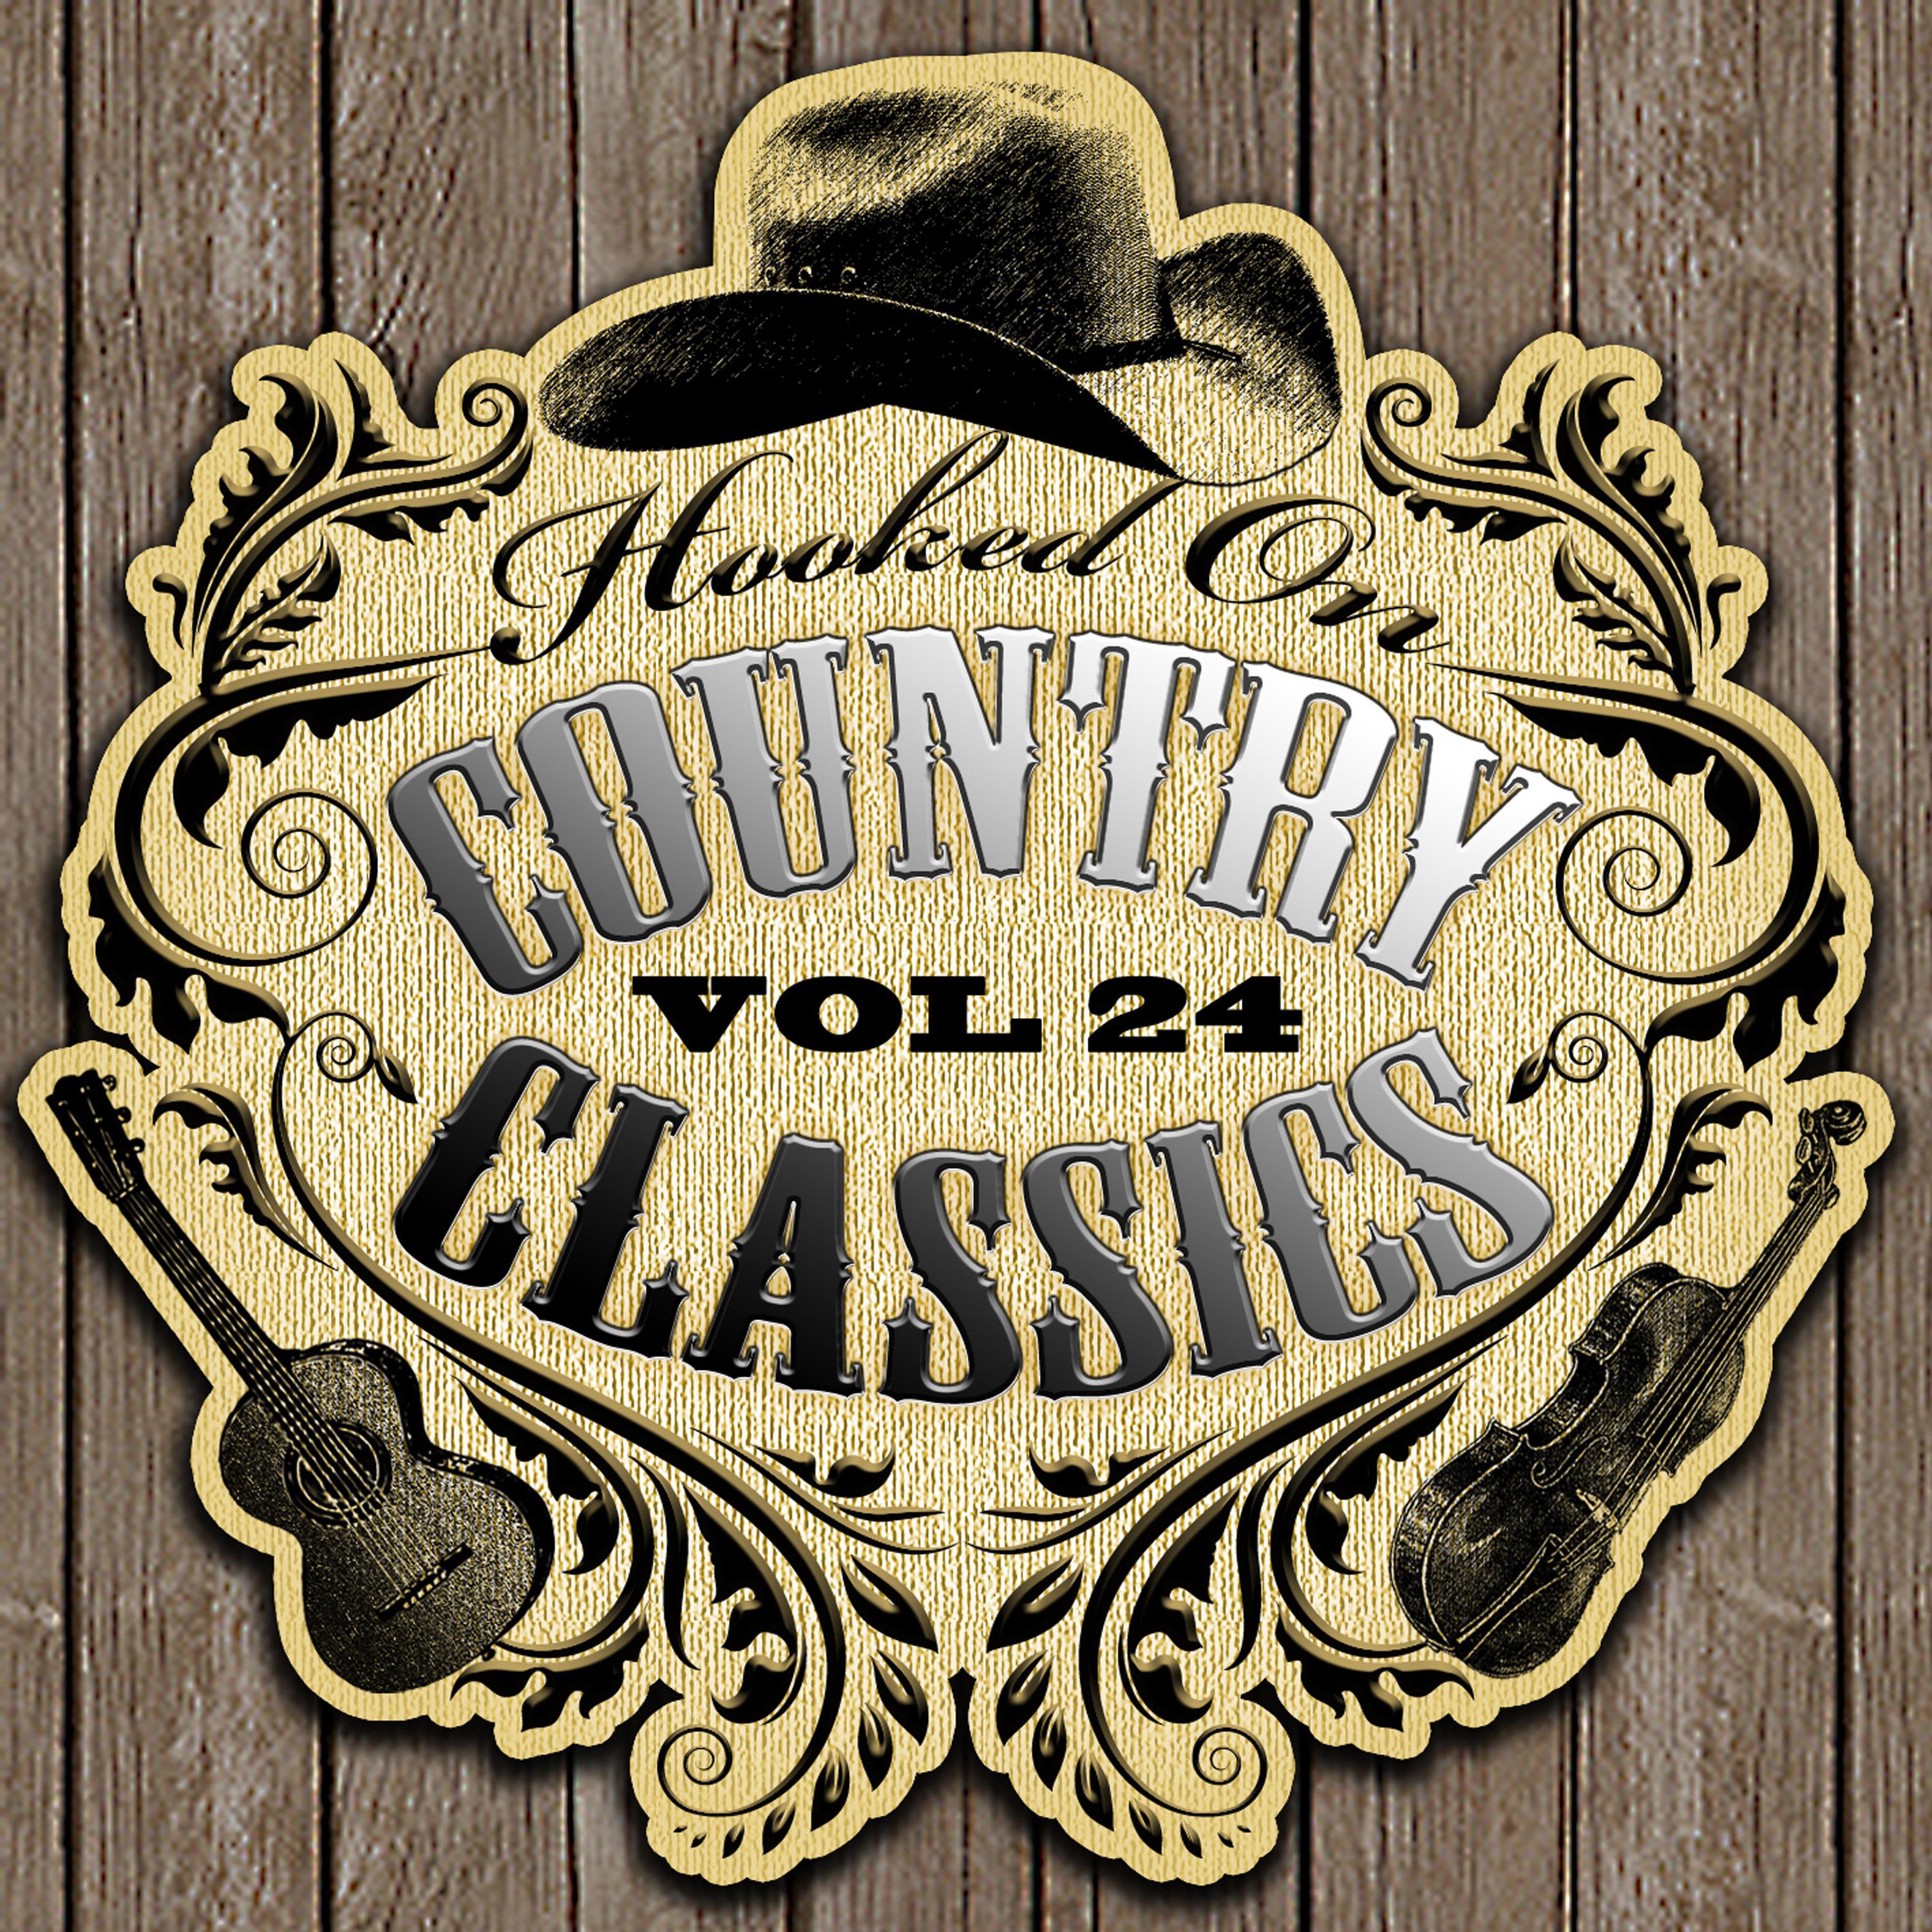 Hooked On Country Classics, Vol. 24